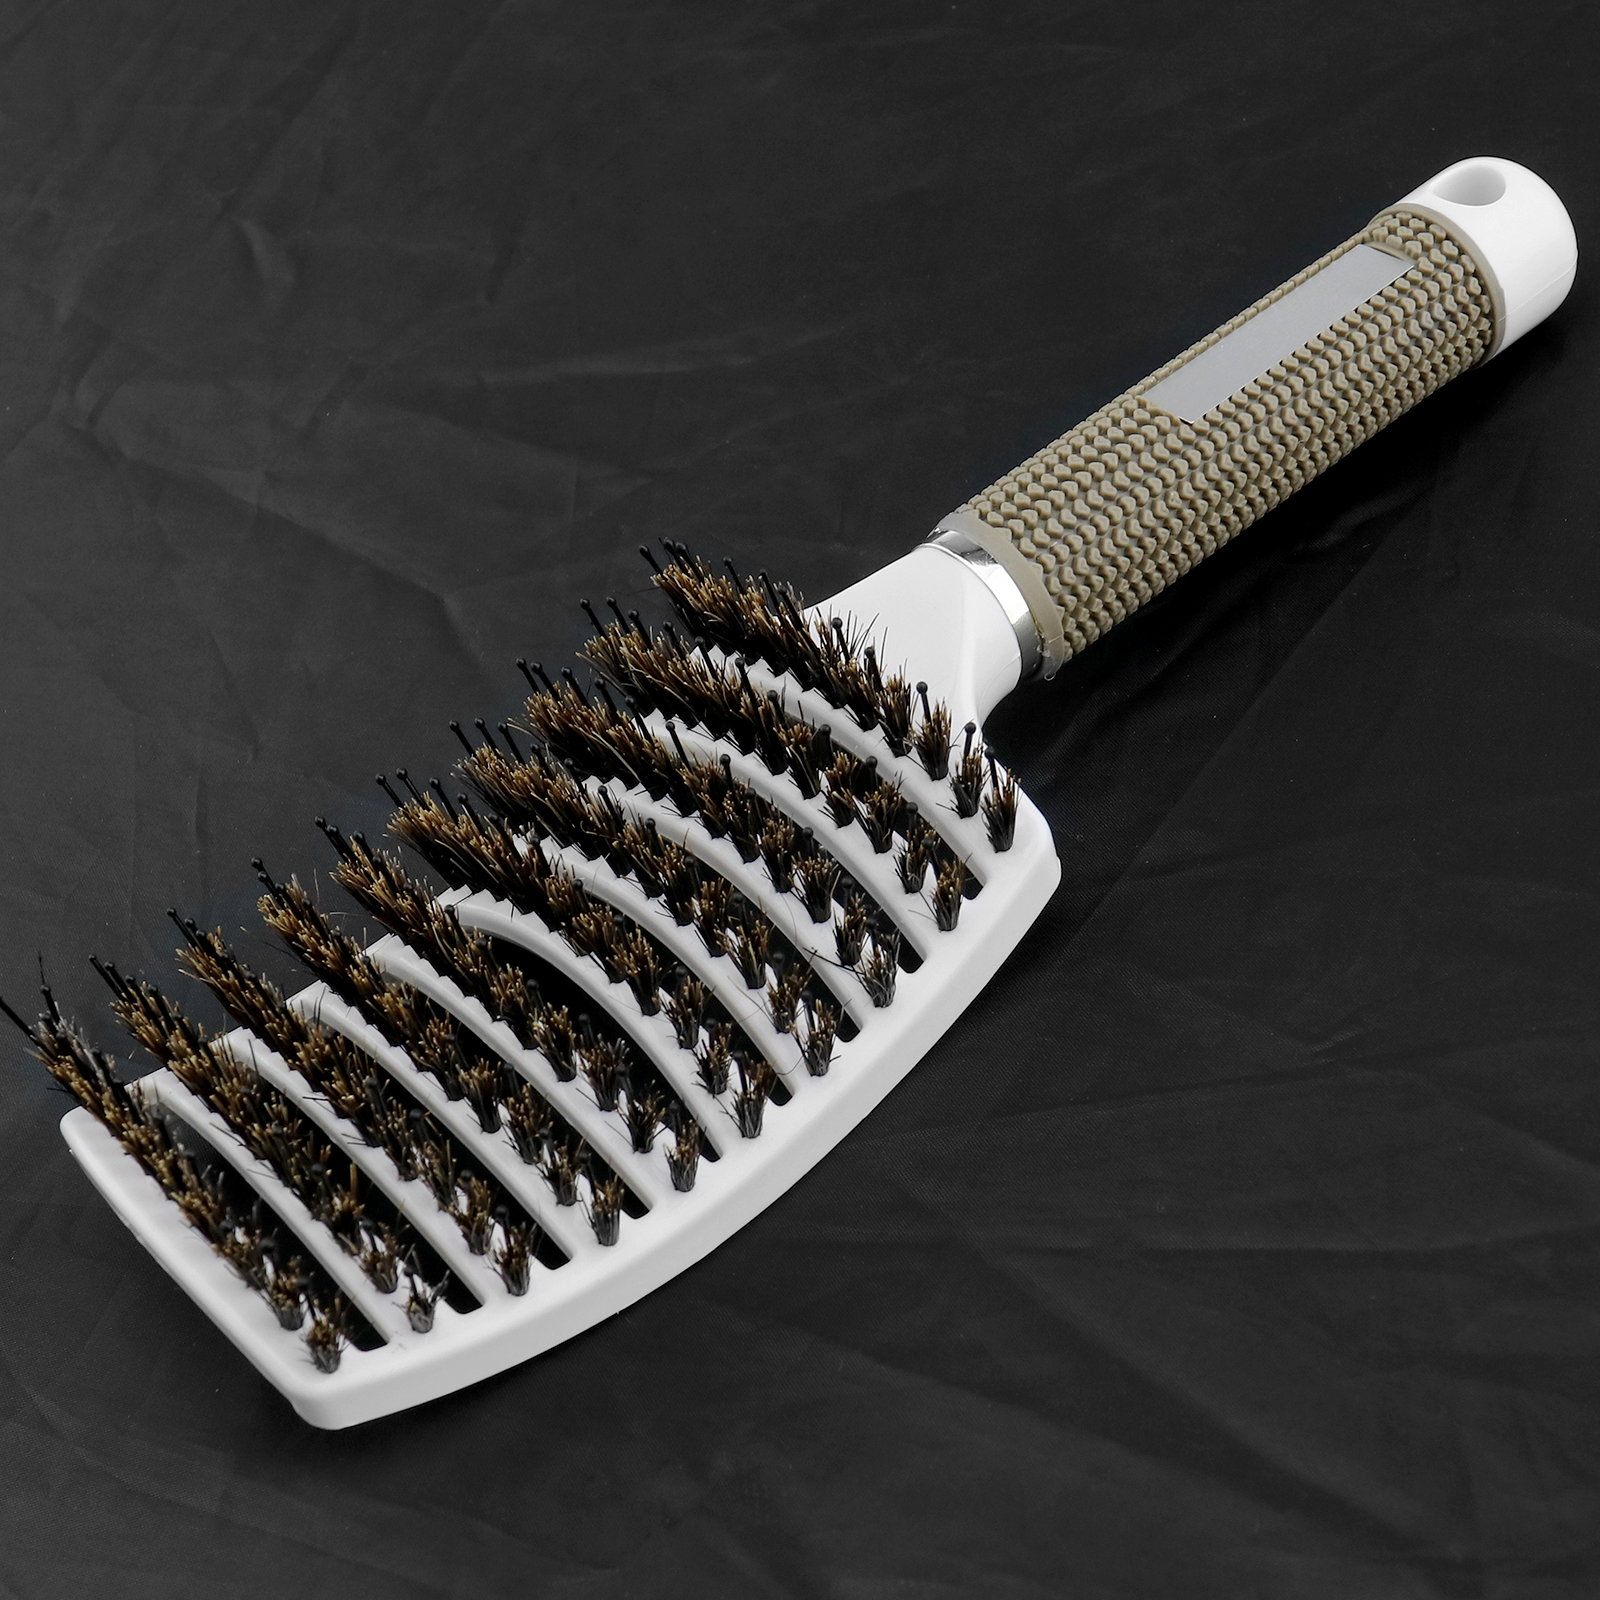 2x Curved Vented Detangling Paddle Hair Brush Fast Blow Dry Scalp Massage 4894669075617 Ebay